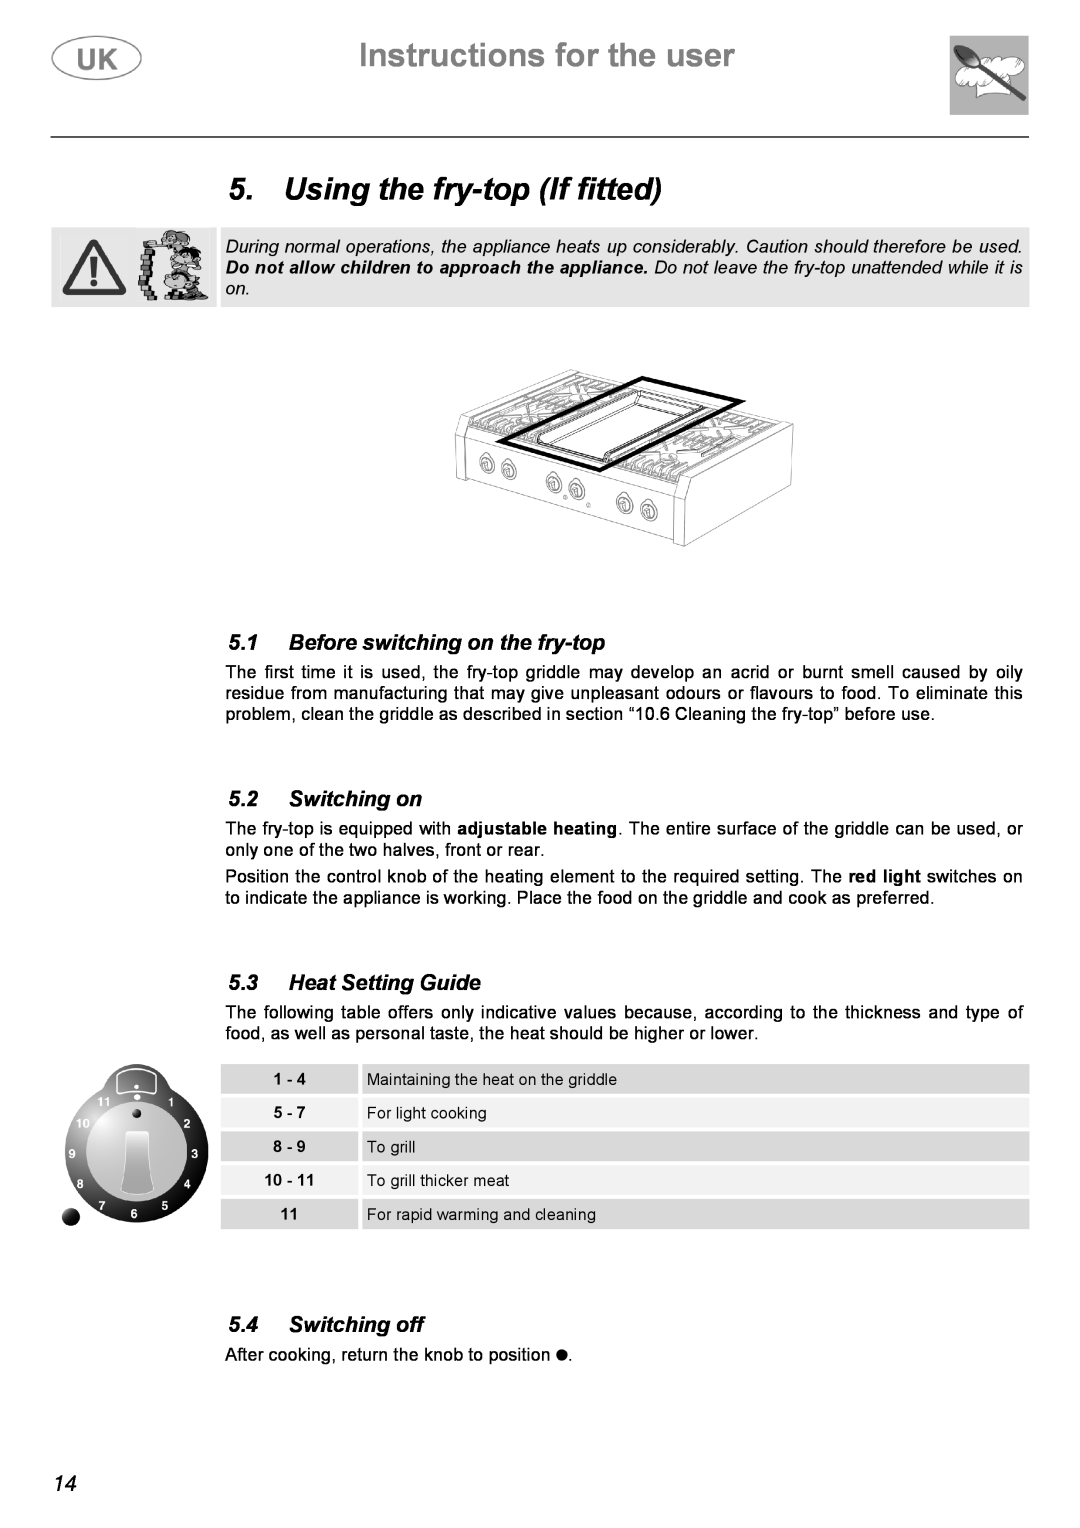 Electrolux C41022G manual Using the fry-top If fitted, Before switching on the fry-top, Switching on, Heat Setting Guide 